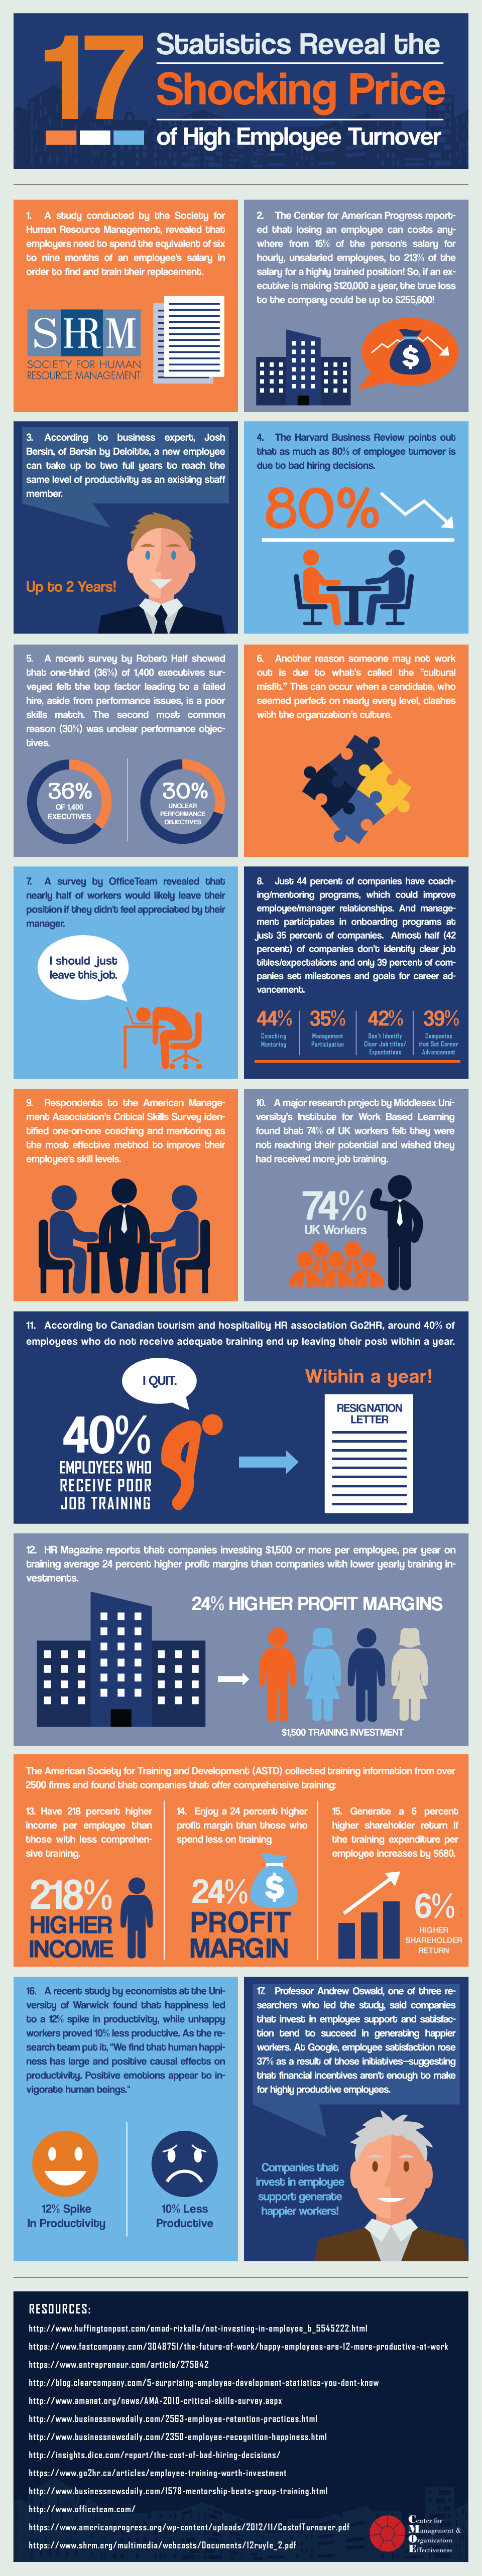 employee-turnover-infographic-final